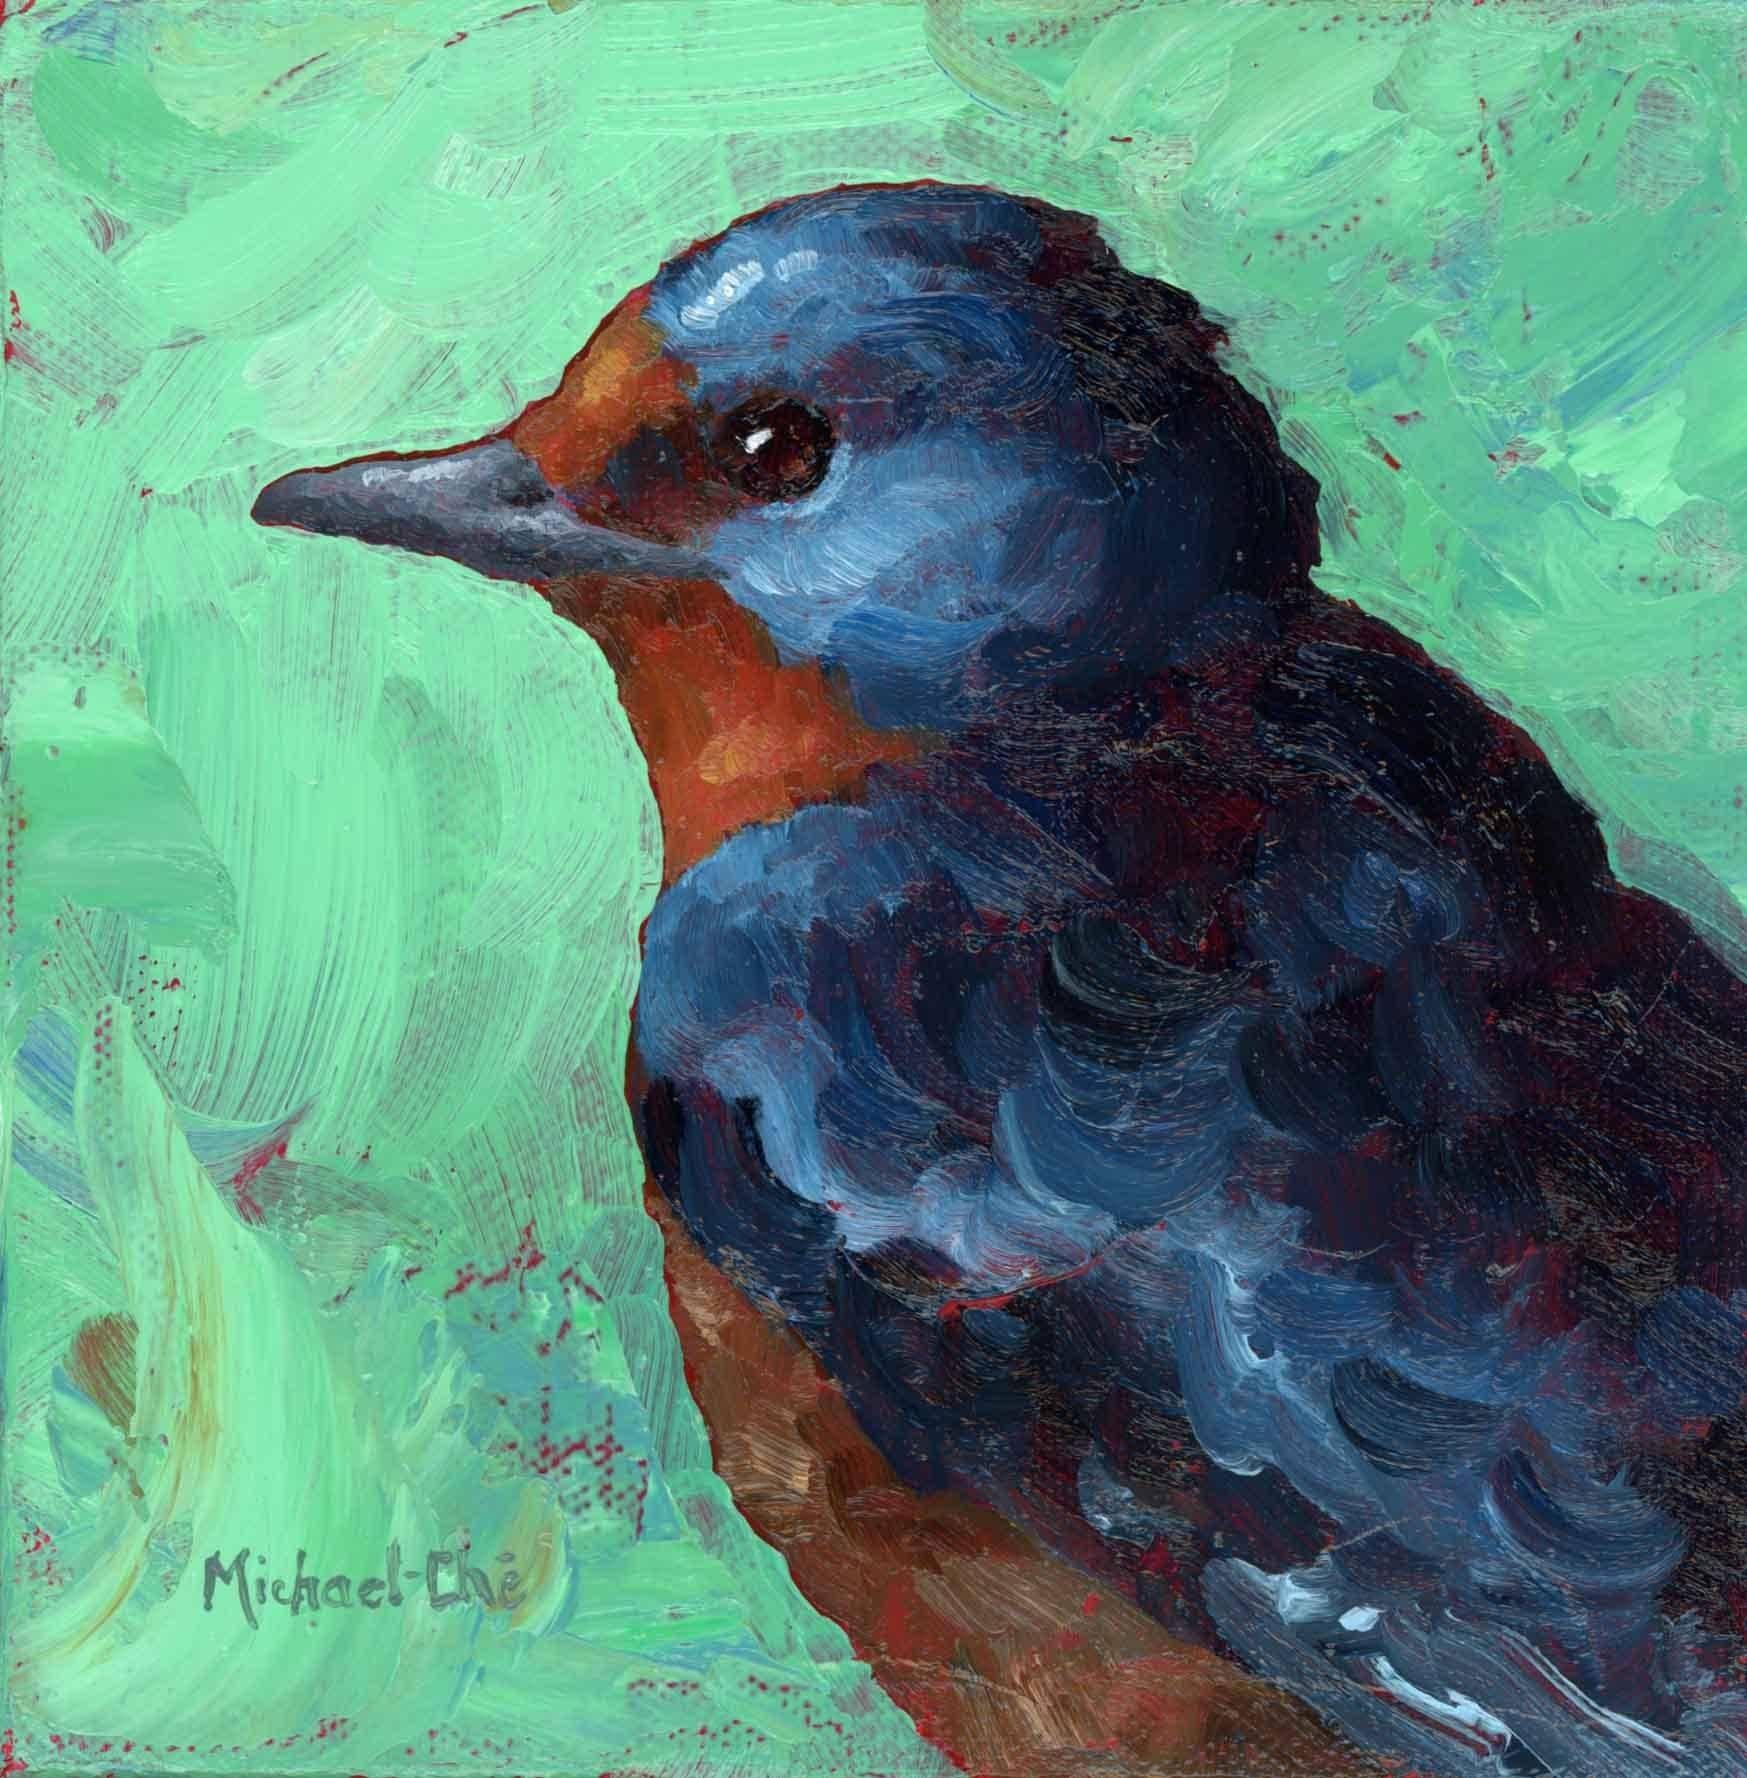 Michael-Che Swisher Animal Painting - "The Blues" Oil painting of a blue bird on a green background